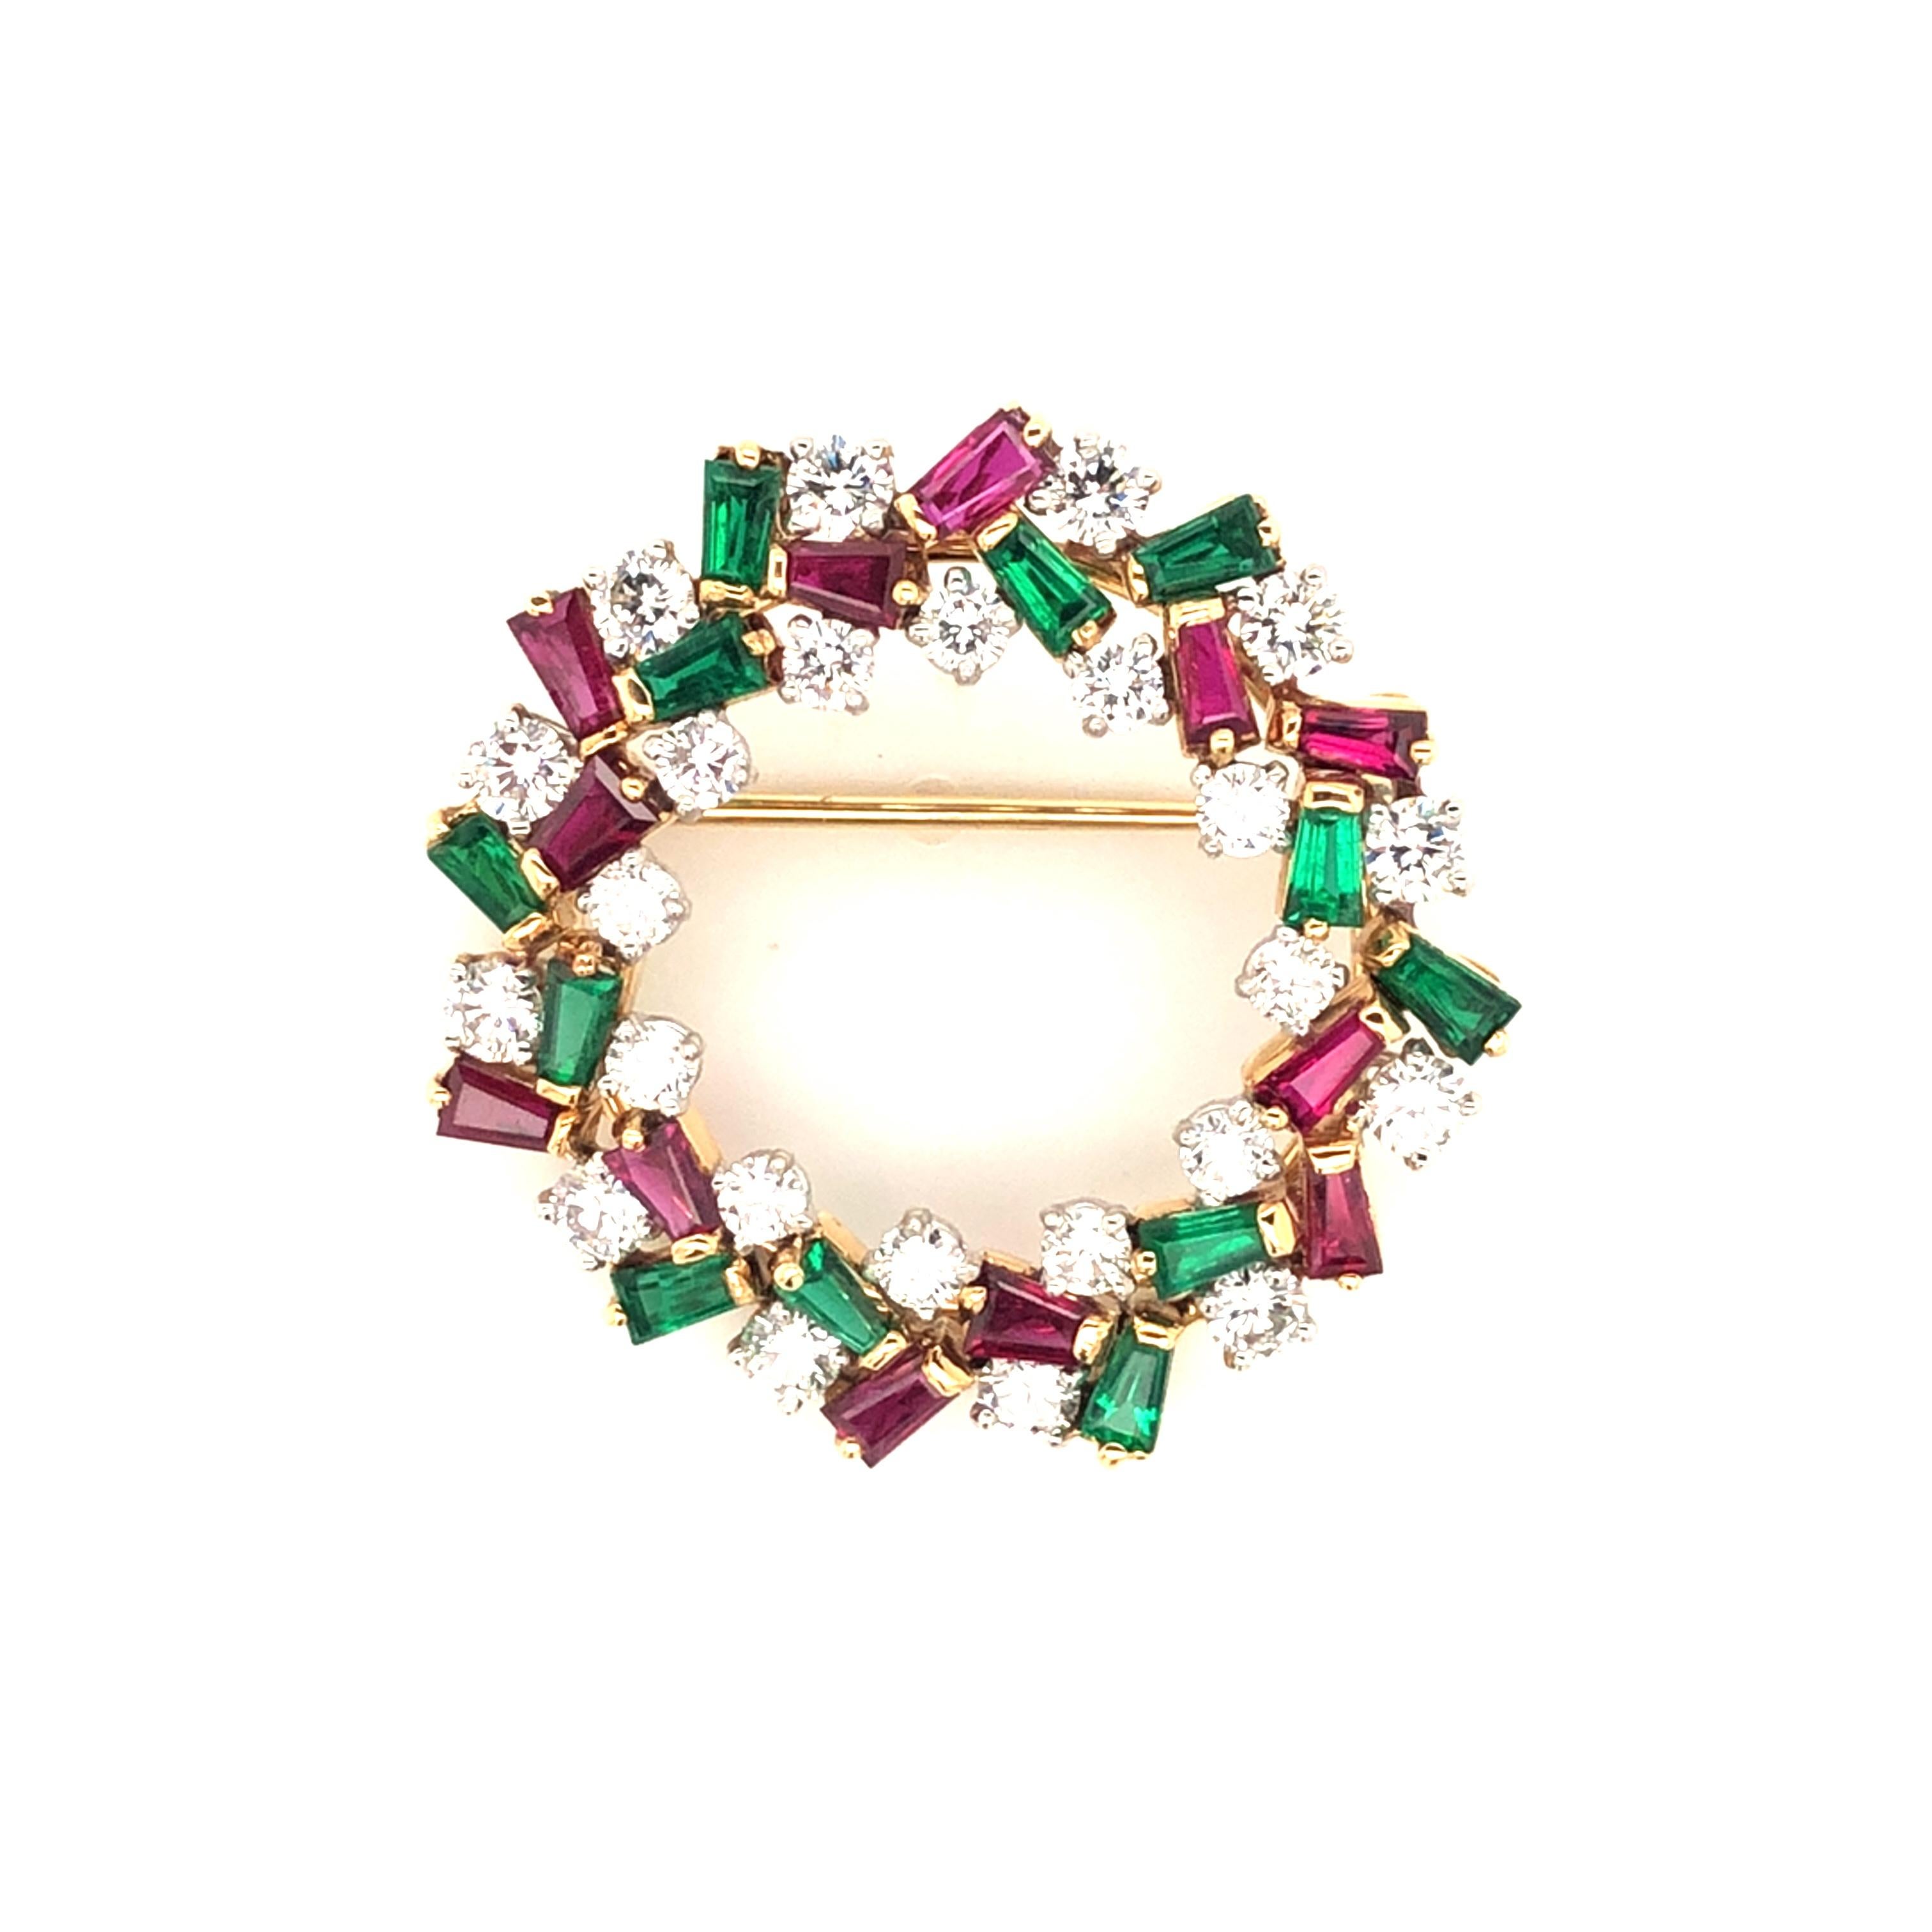 Oscar Heyman 18k yellow gold and platinum holiday wreath brooch contains baguette rubies (2.02cts), baguette emeralds (1.99cts) and round diamonds (2.46cts). The diameter of the brooch is 33mm. It is stamped with the makers mark, 18K and PLAT, and